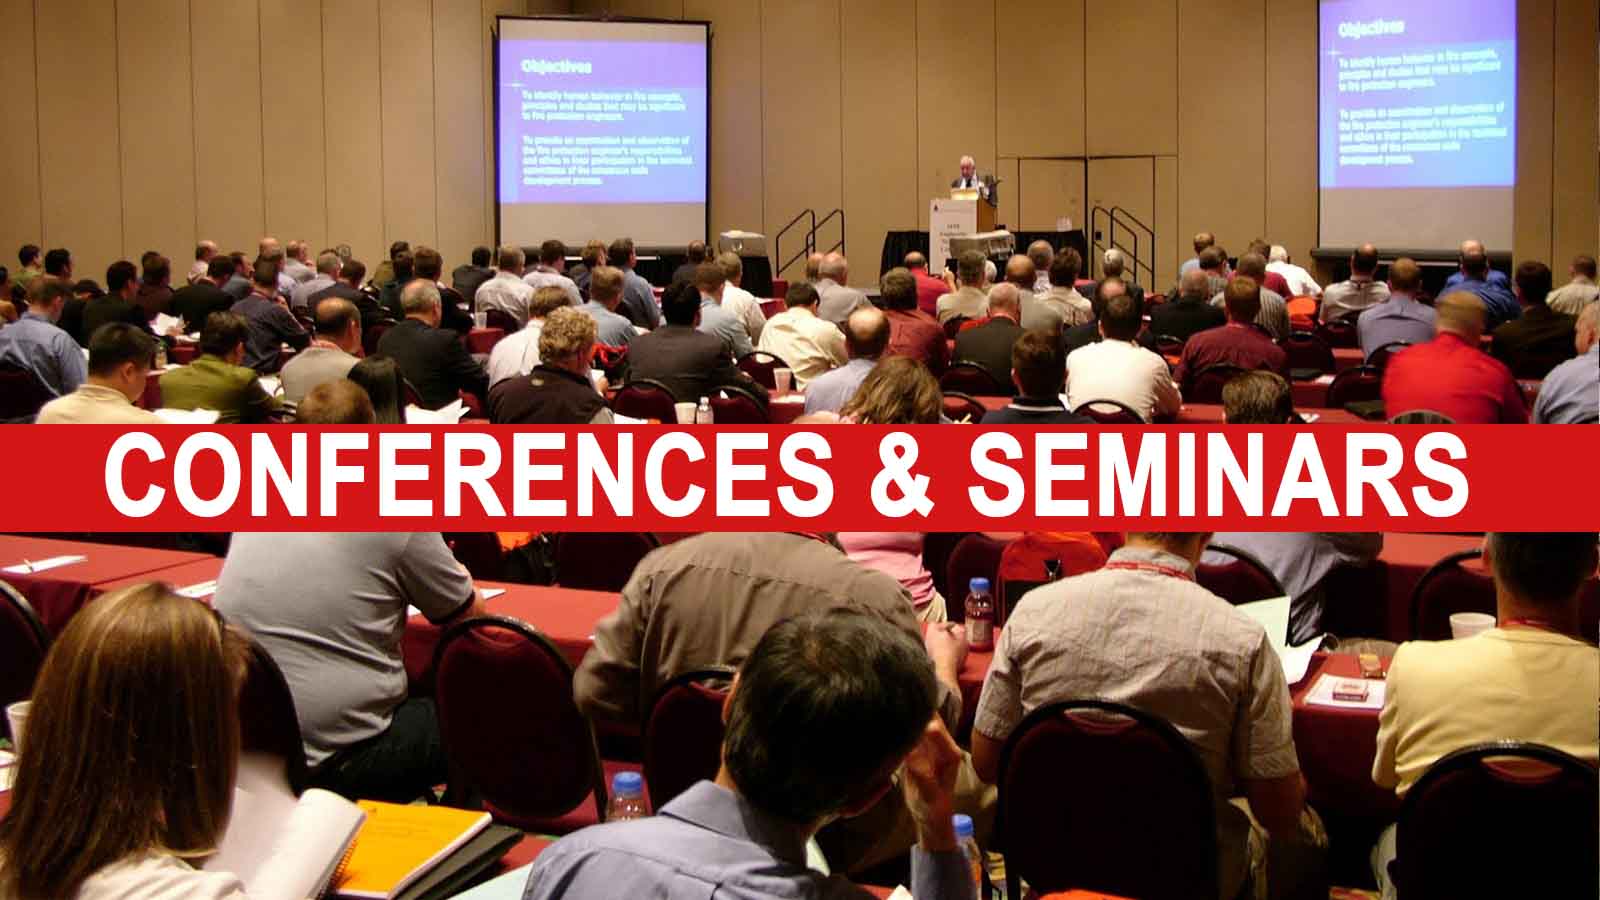 What are the advantages of attending conferences and seminars